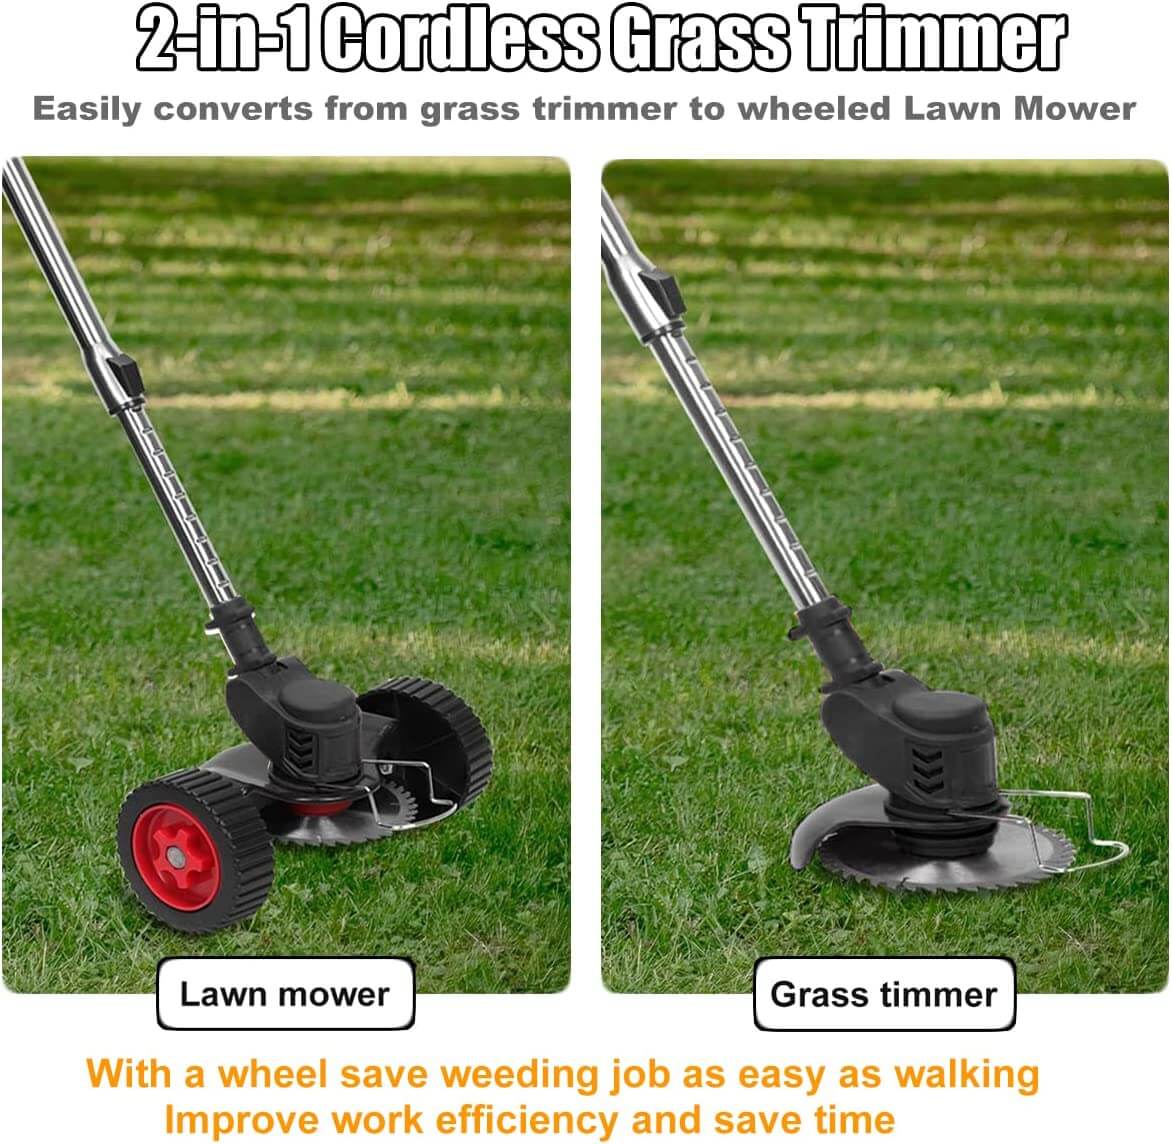 An all-in-one cordless push lawn mower, trimmer and edger. Easily converts from weed eater to wheeled Lawn Mower. Make your weed eater the envy of the neighborhood.